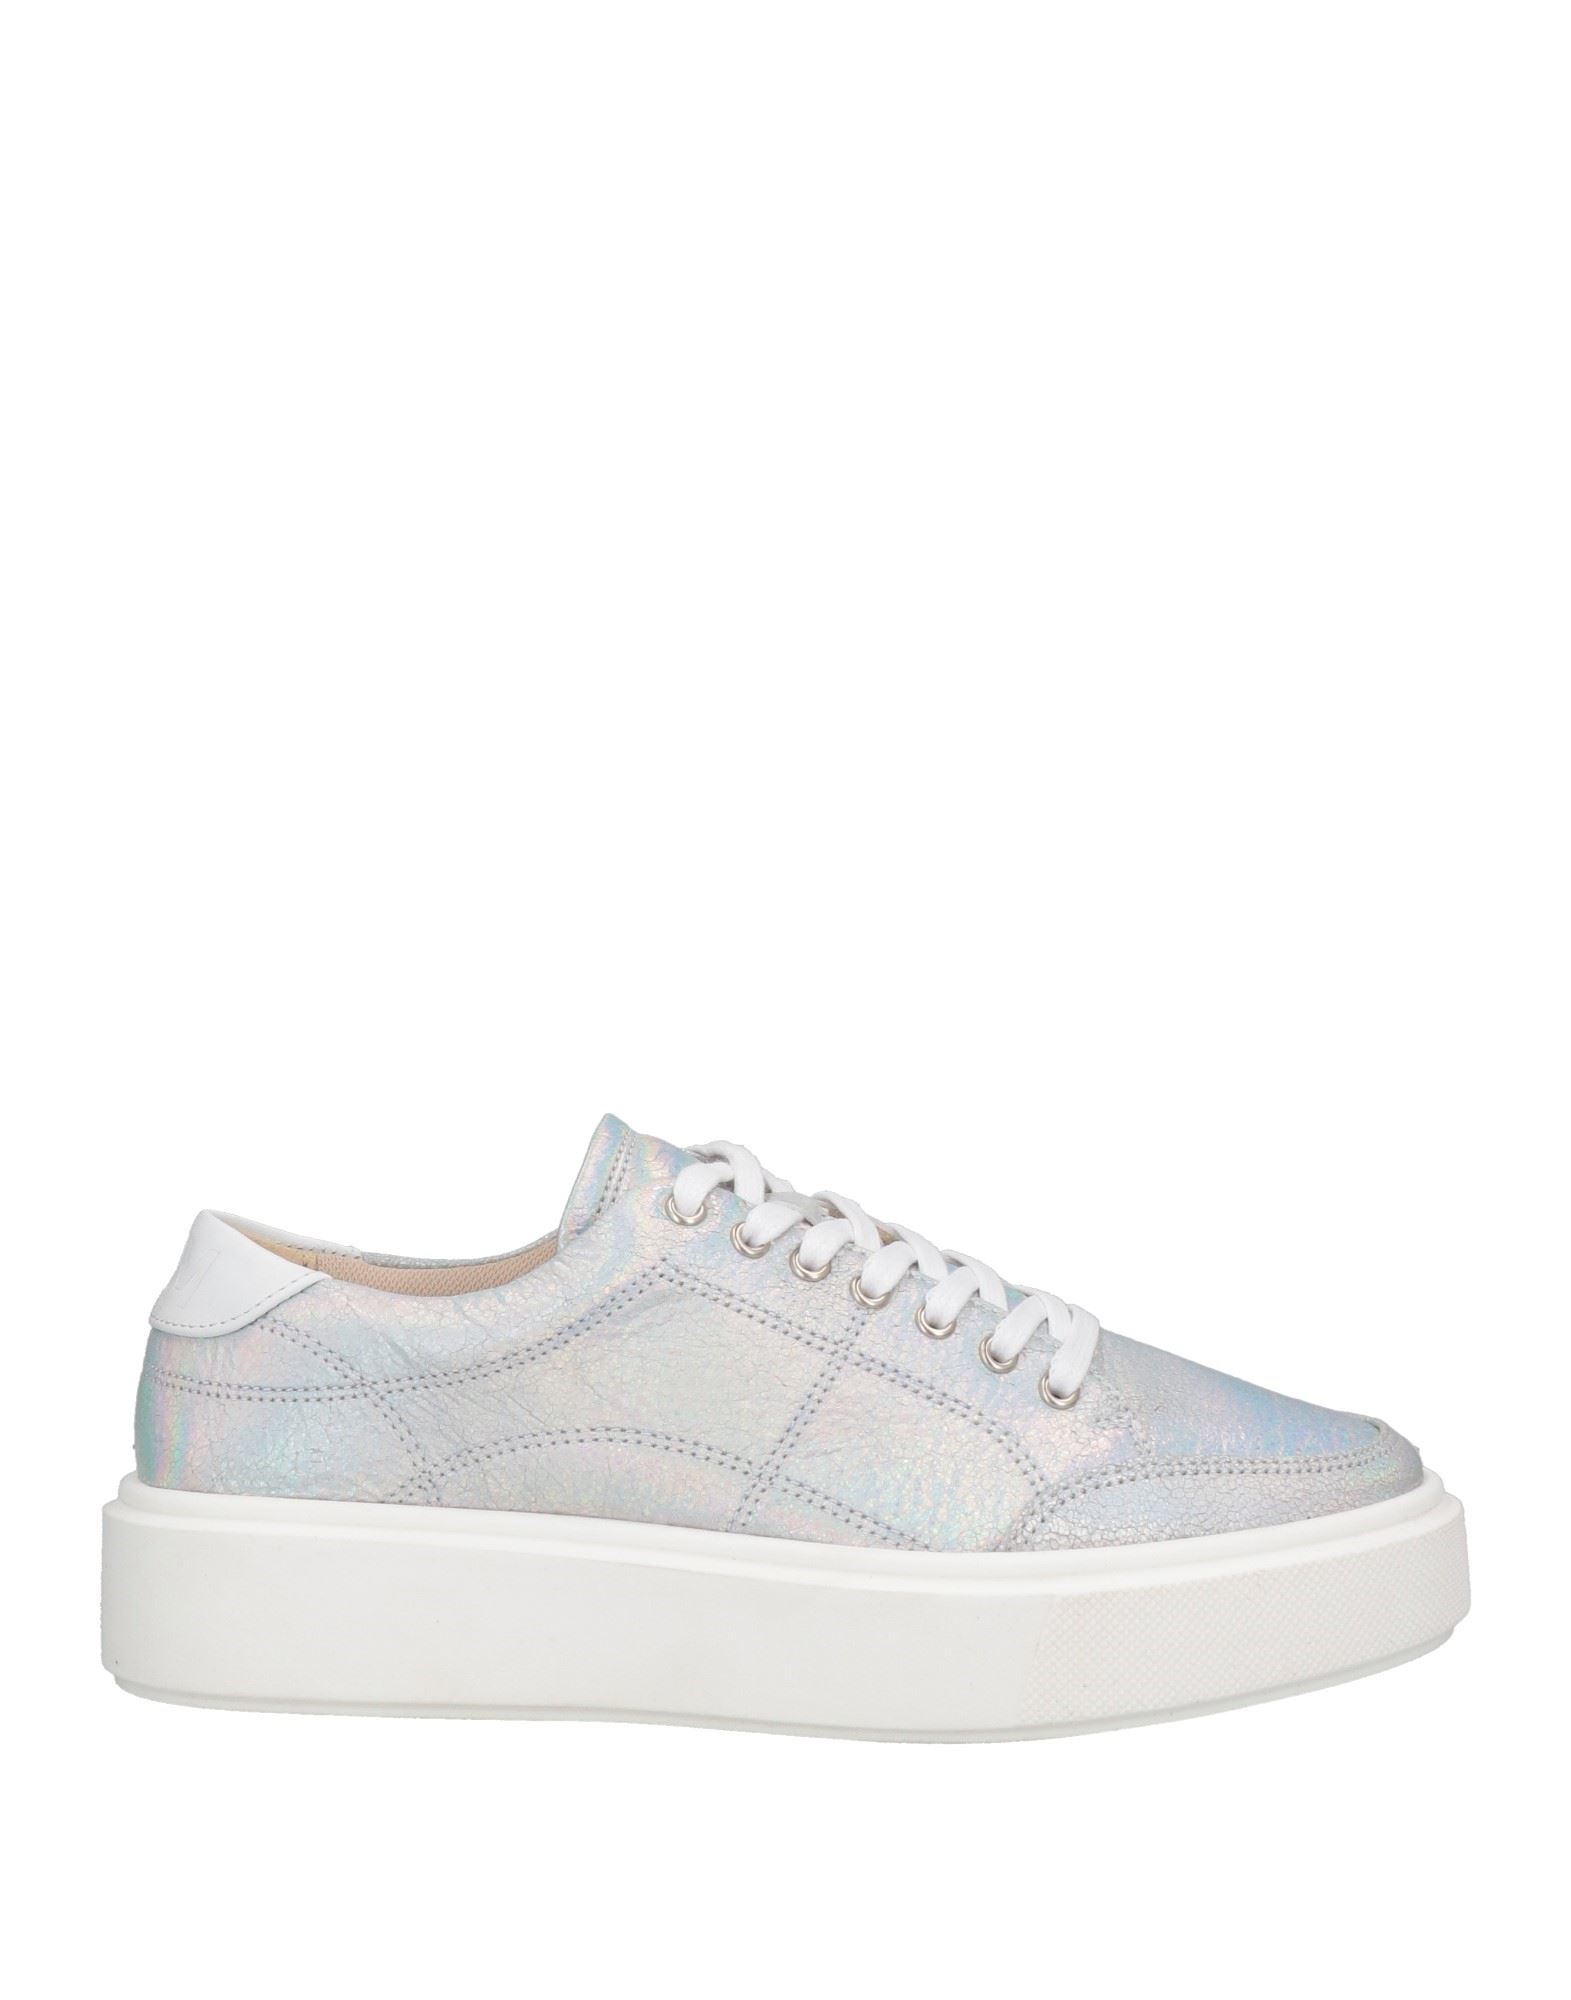 Canal St Martin Sneakers In Silver